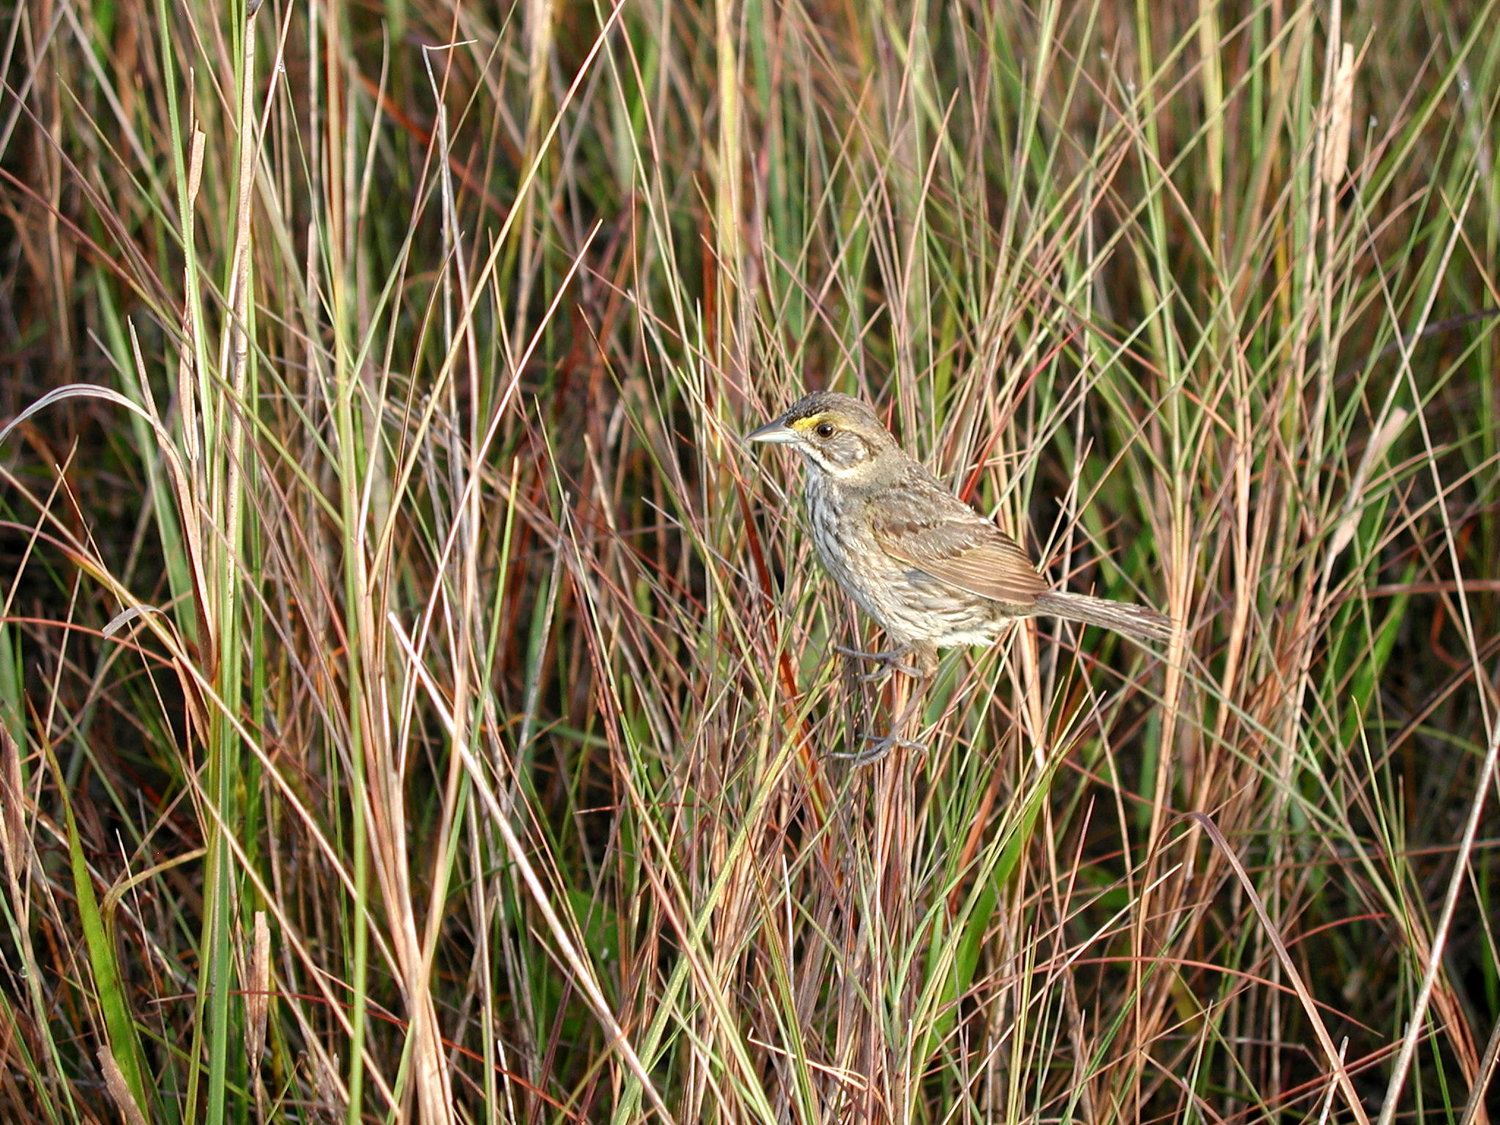 The Cape Sable seaside sparrow is an endangered species found in the Everglades. [Photo by Lori Oberhofter, National Park Service]